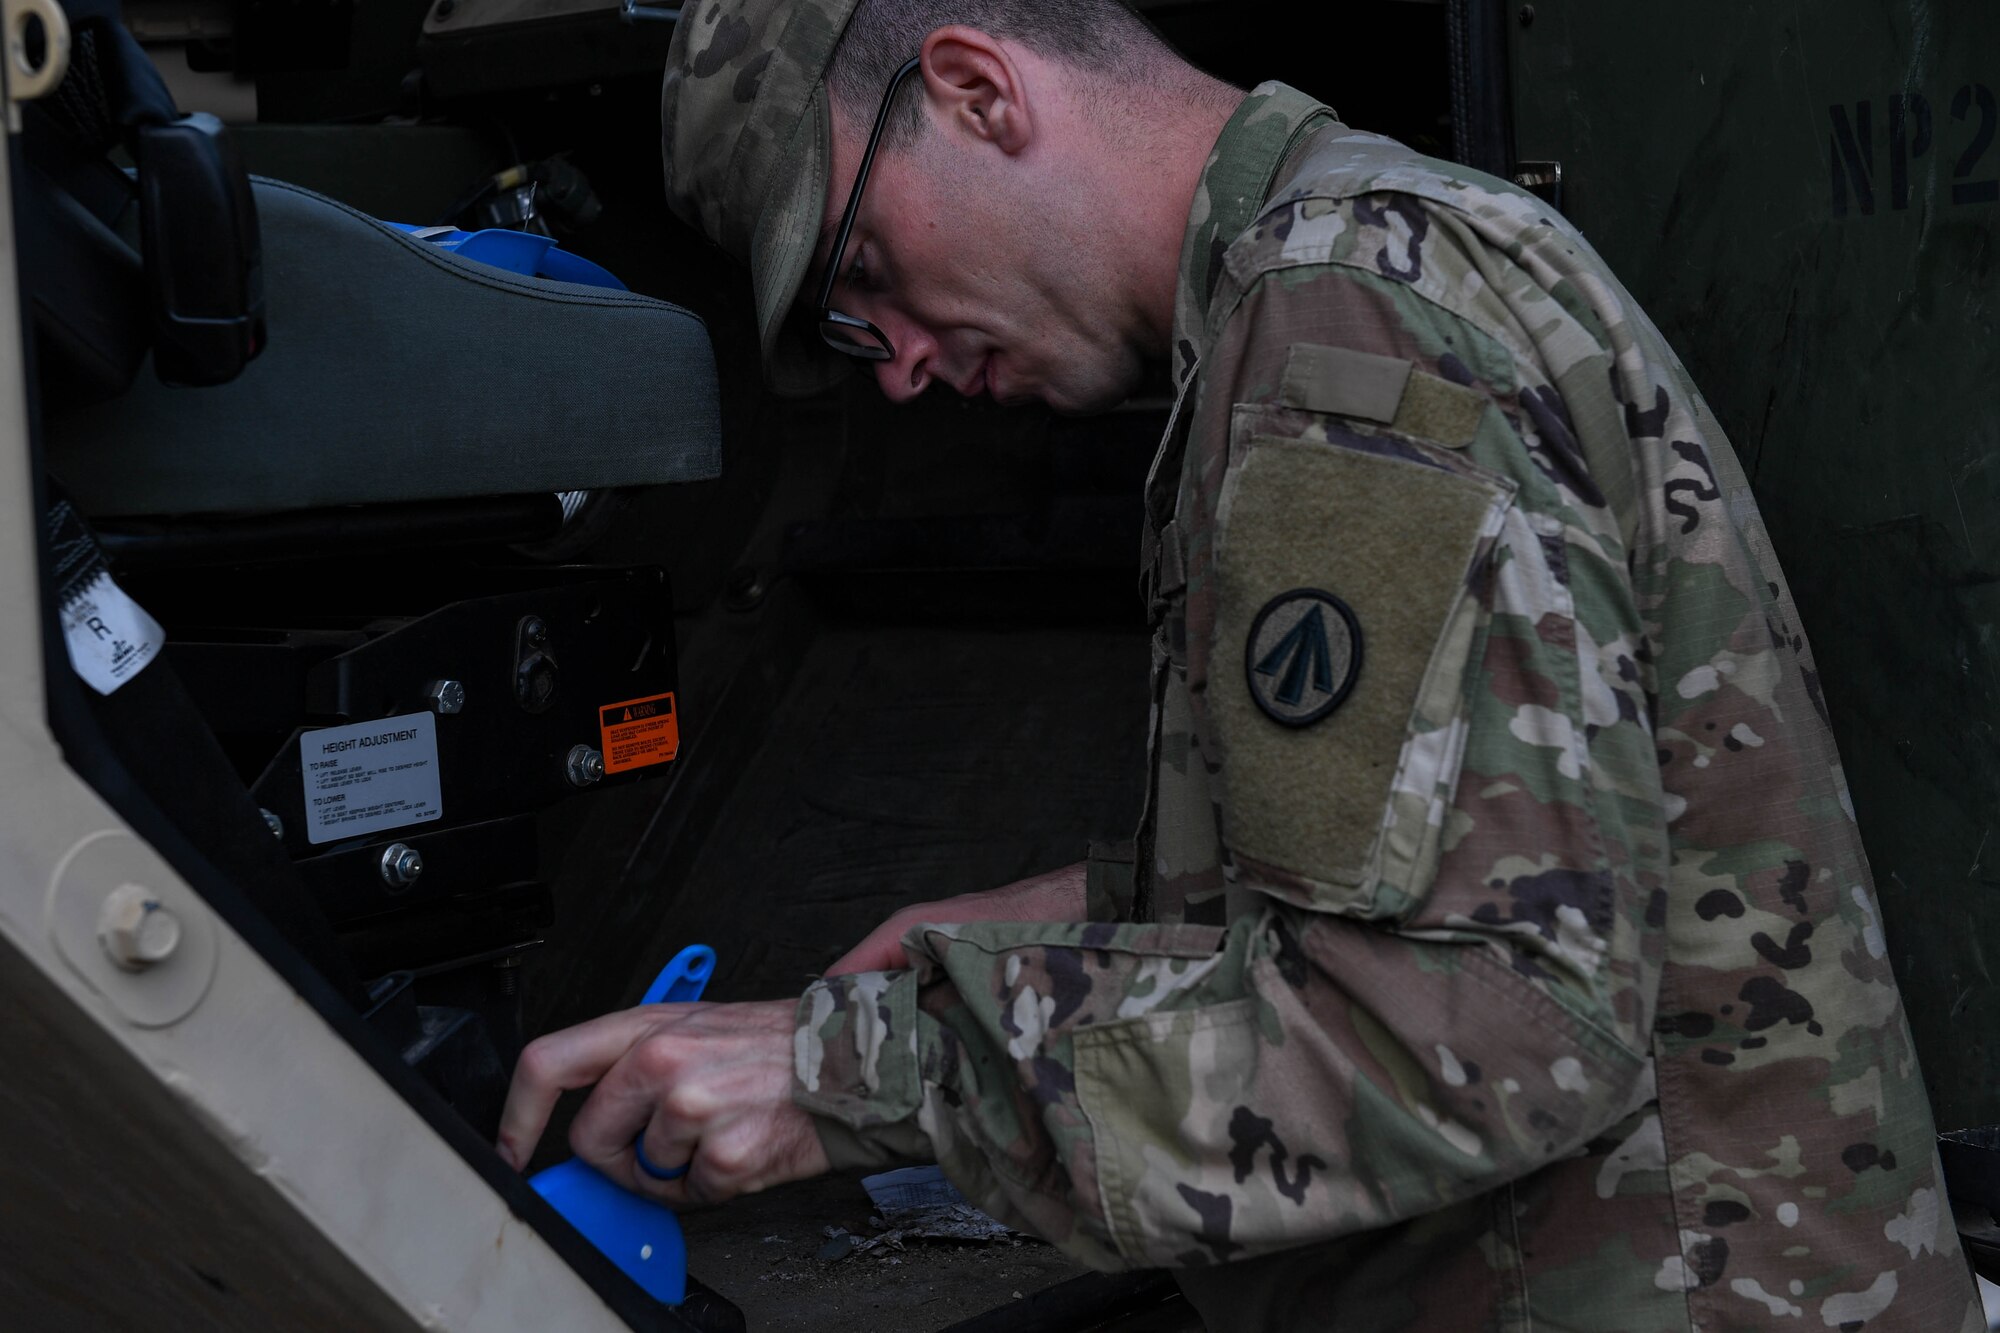 U.S. Army Spc. Daniel Mitchell, a heavy vehicle operator assigned to the 597th Transportation Brigade, 832nd Trans. Battalion, 688th Rapid Port Opening Element, sweeps out the cab of a truck during preventative maintenance checks at Joint Base Langley-Eustis, Virginia, Sept. 16, 2019. The Soldiers of the 688th RPOE are not only responsible for the upkeep and maintenance of the unit’s vehicles, but also ensuring they are clean. (U.S. Air Force photo by Senior Airman Derek Seifert)